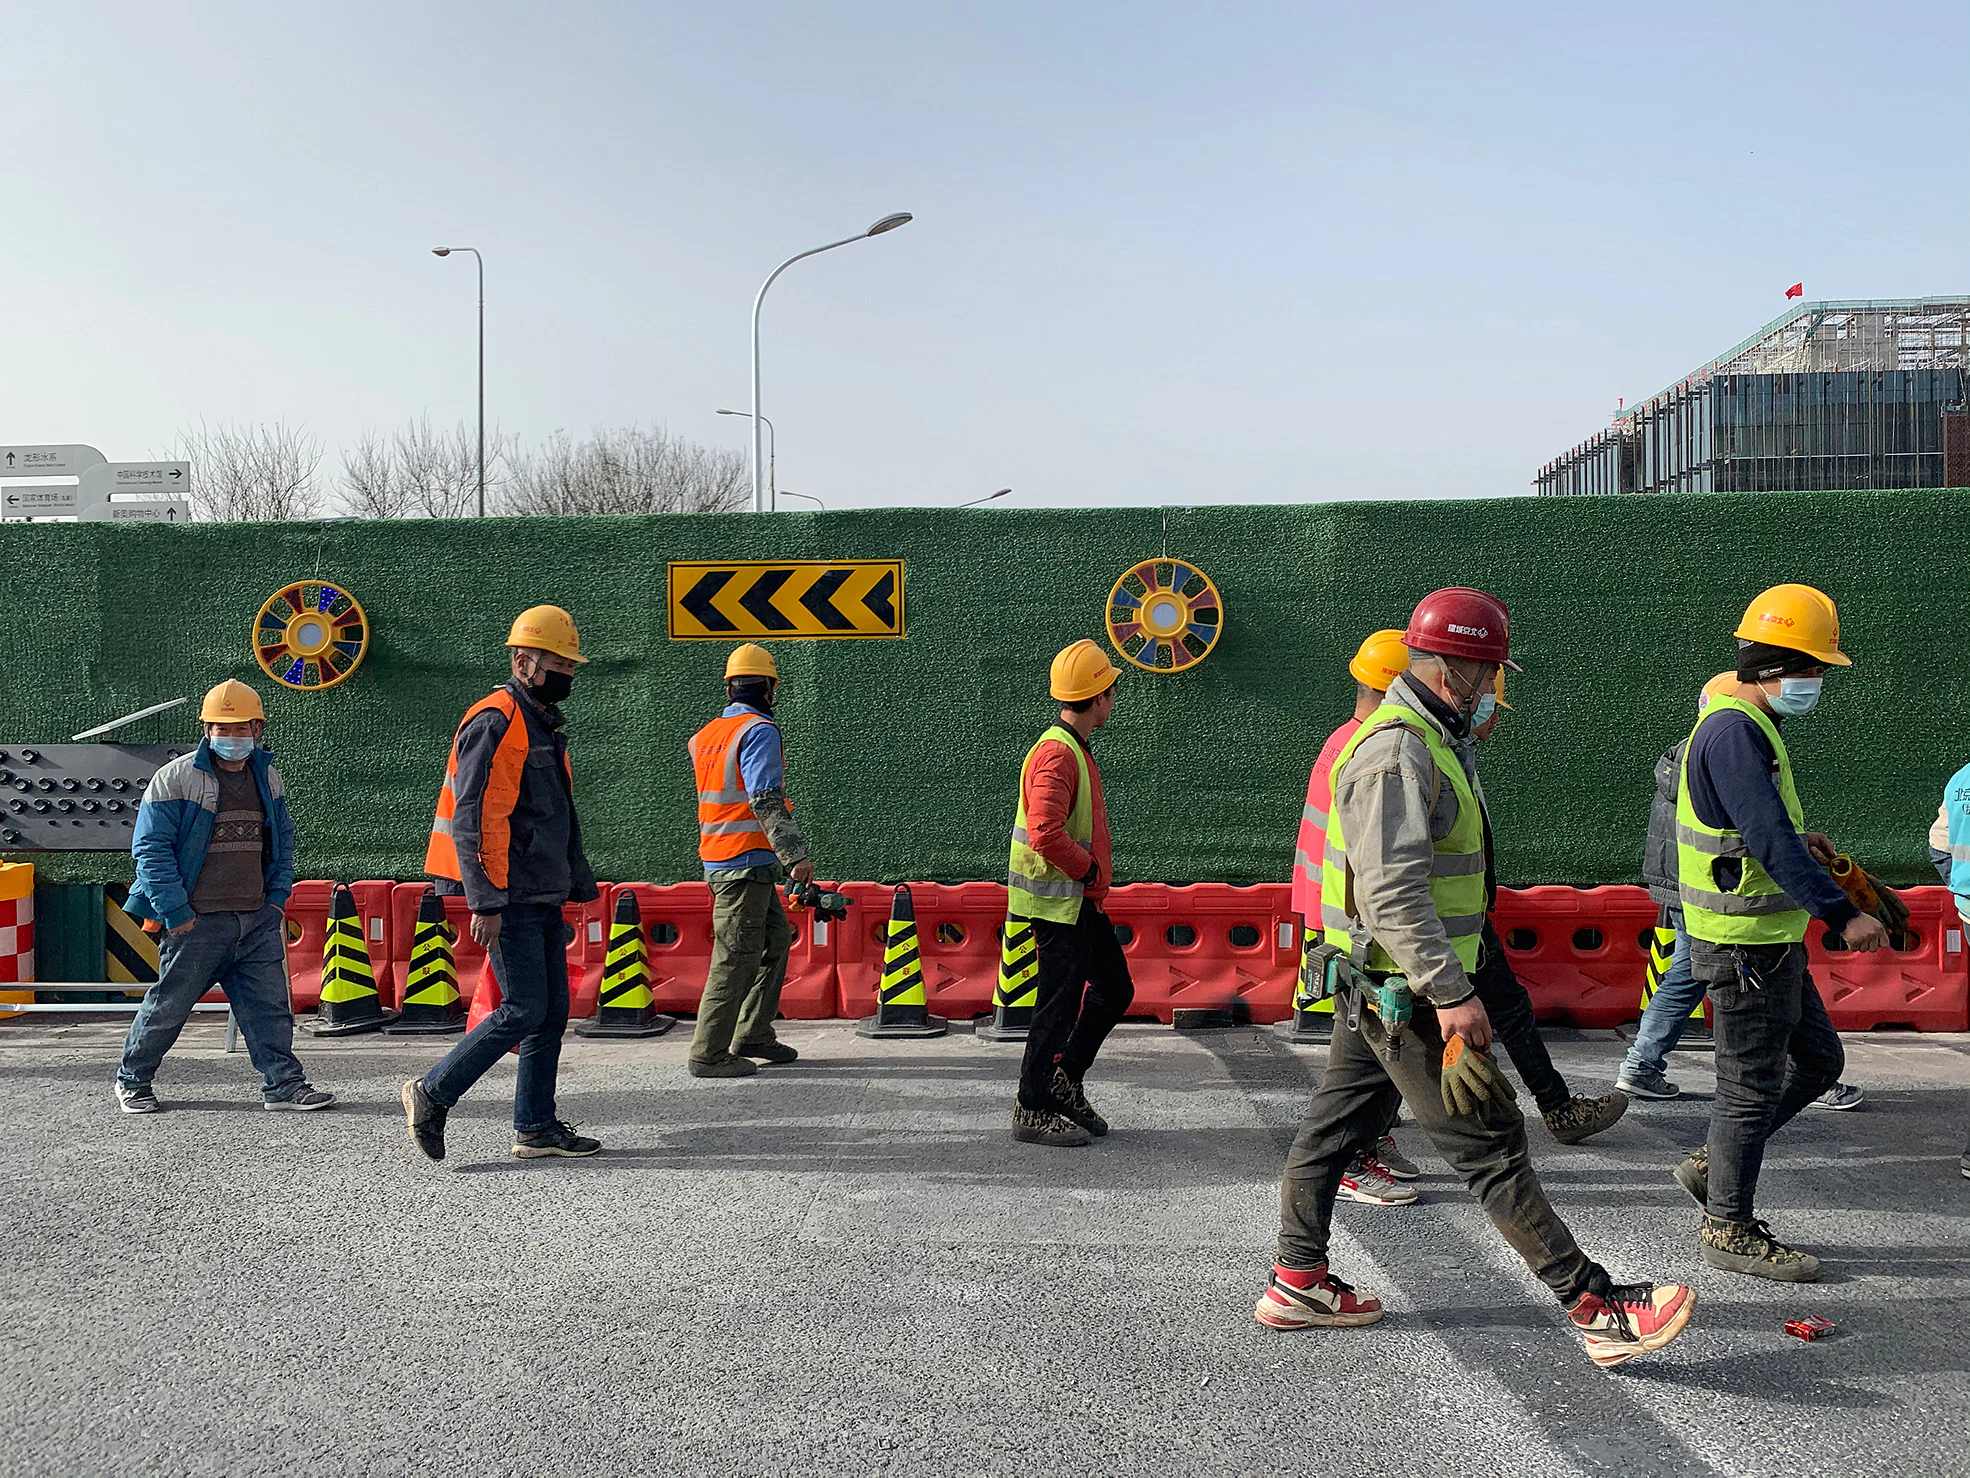 Construction workers in Beijing walking to a worksite in the city. The Majuqiao offers numerous manual, short-term jobs, including those in construction. Photo: Danson Cheong.